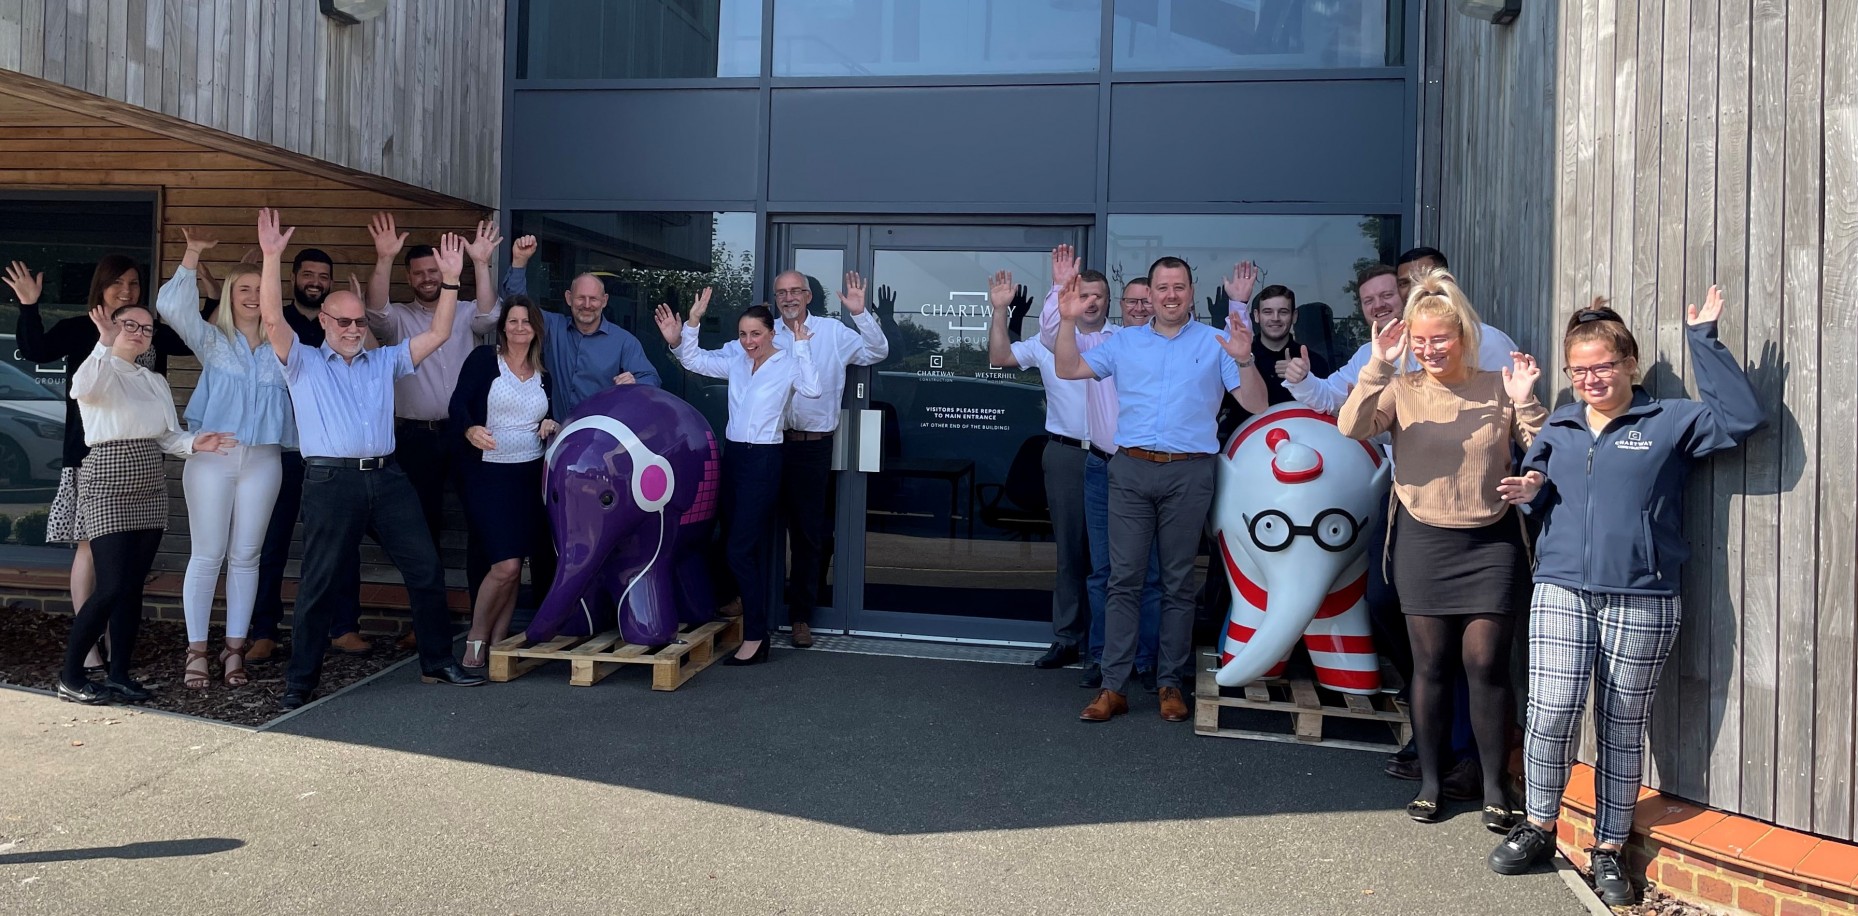 Our team were super excited to welcome our Elmer’s to their new home at our Head Office